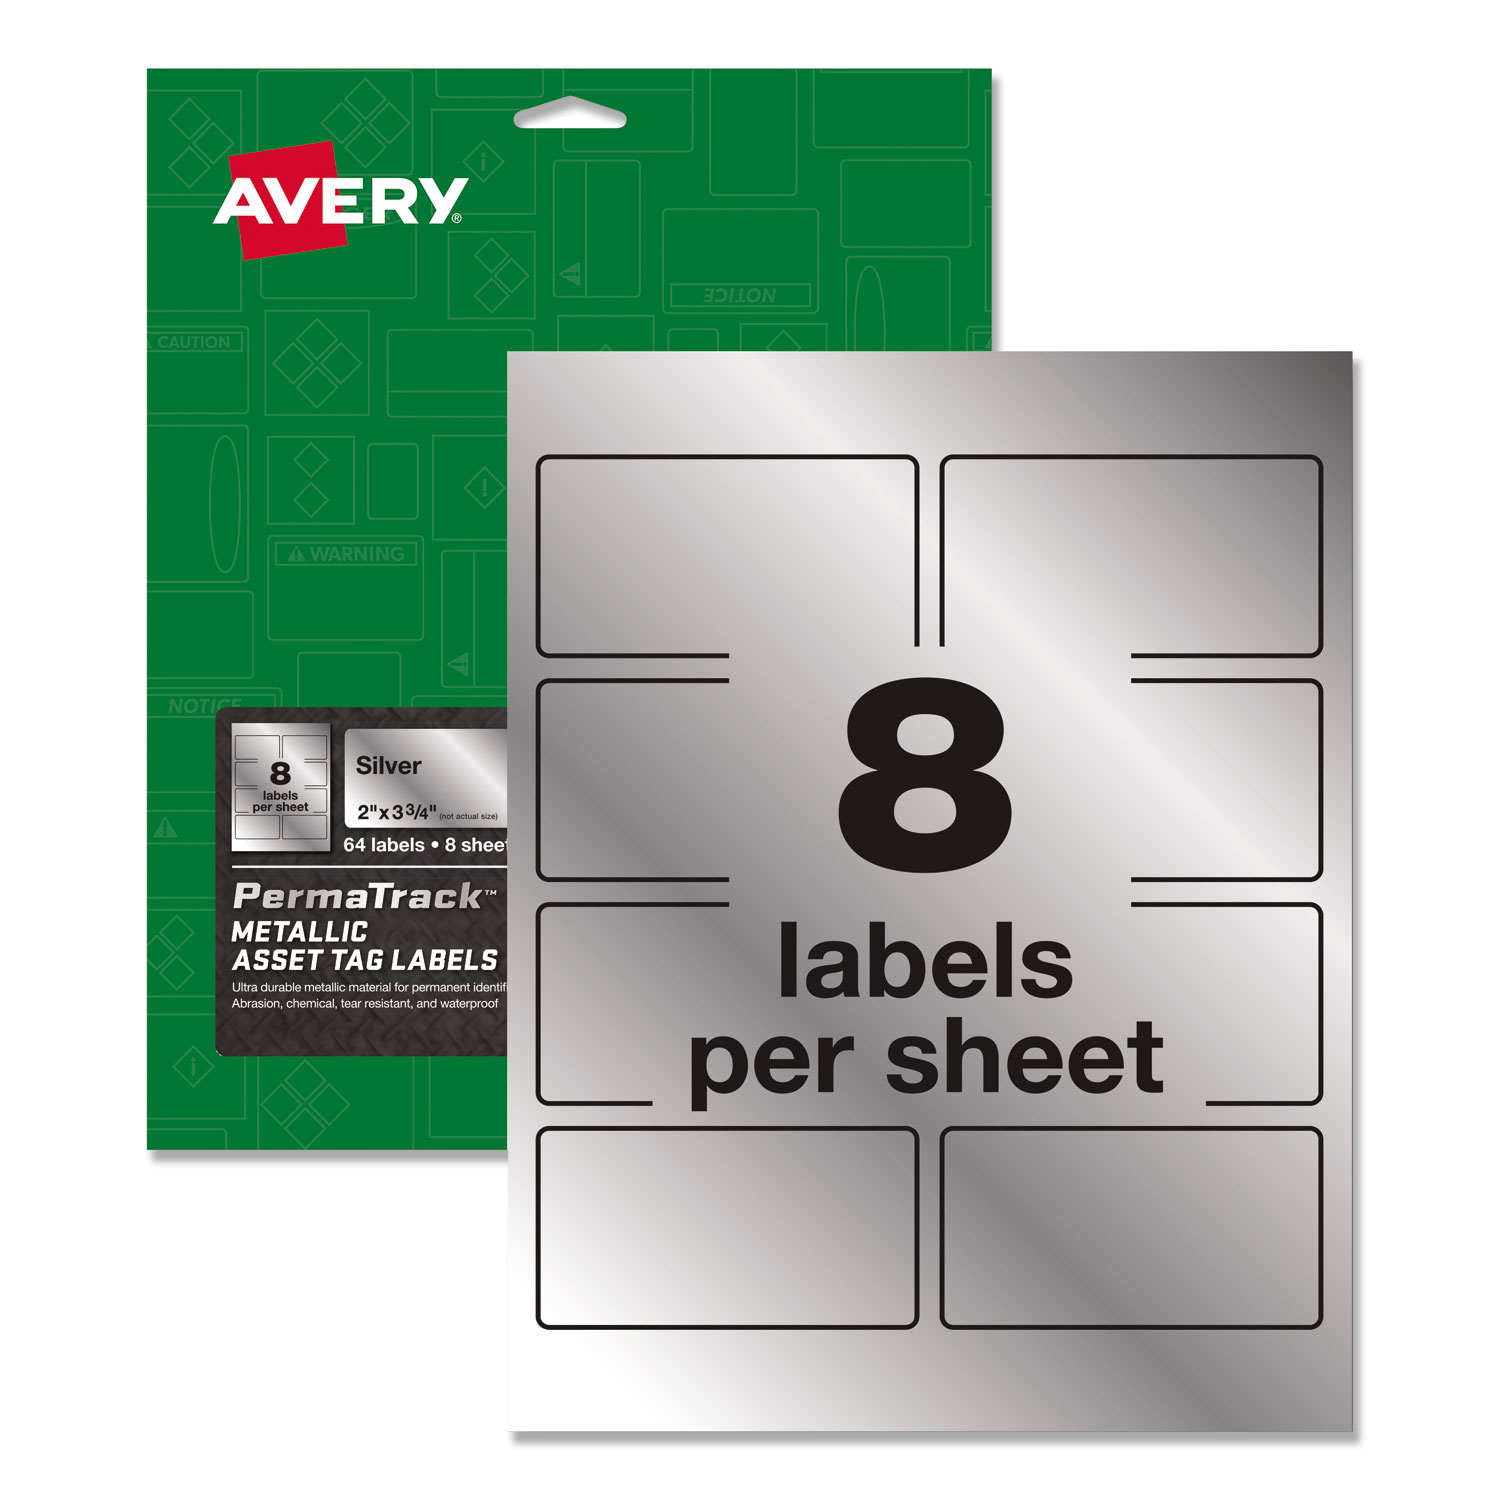  Avery 61520 PermaTrack Metallic Asset Tag Labels, Laser Printers, 2 x 3.75, Silver, 8/Sheet, 8 Sheets/Pack (AVE61520) 